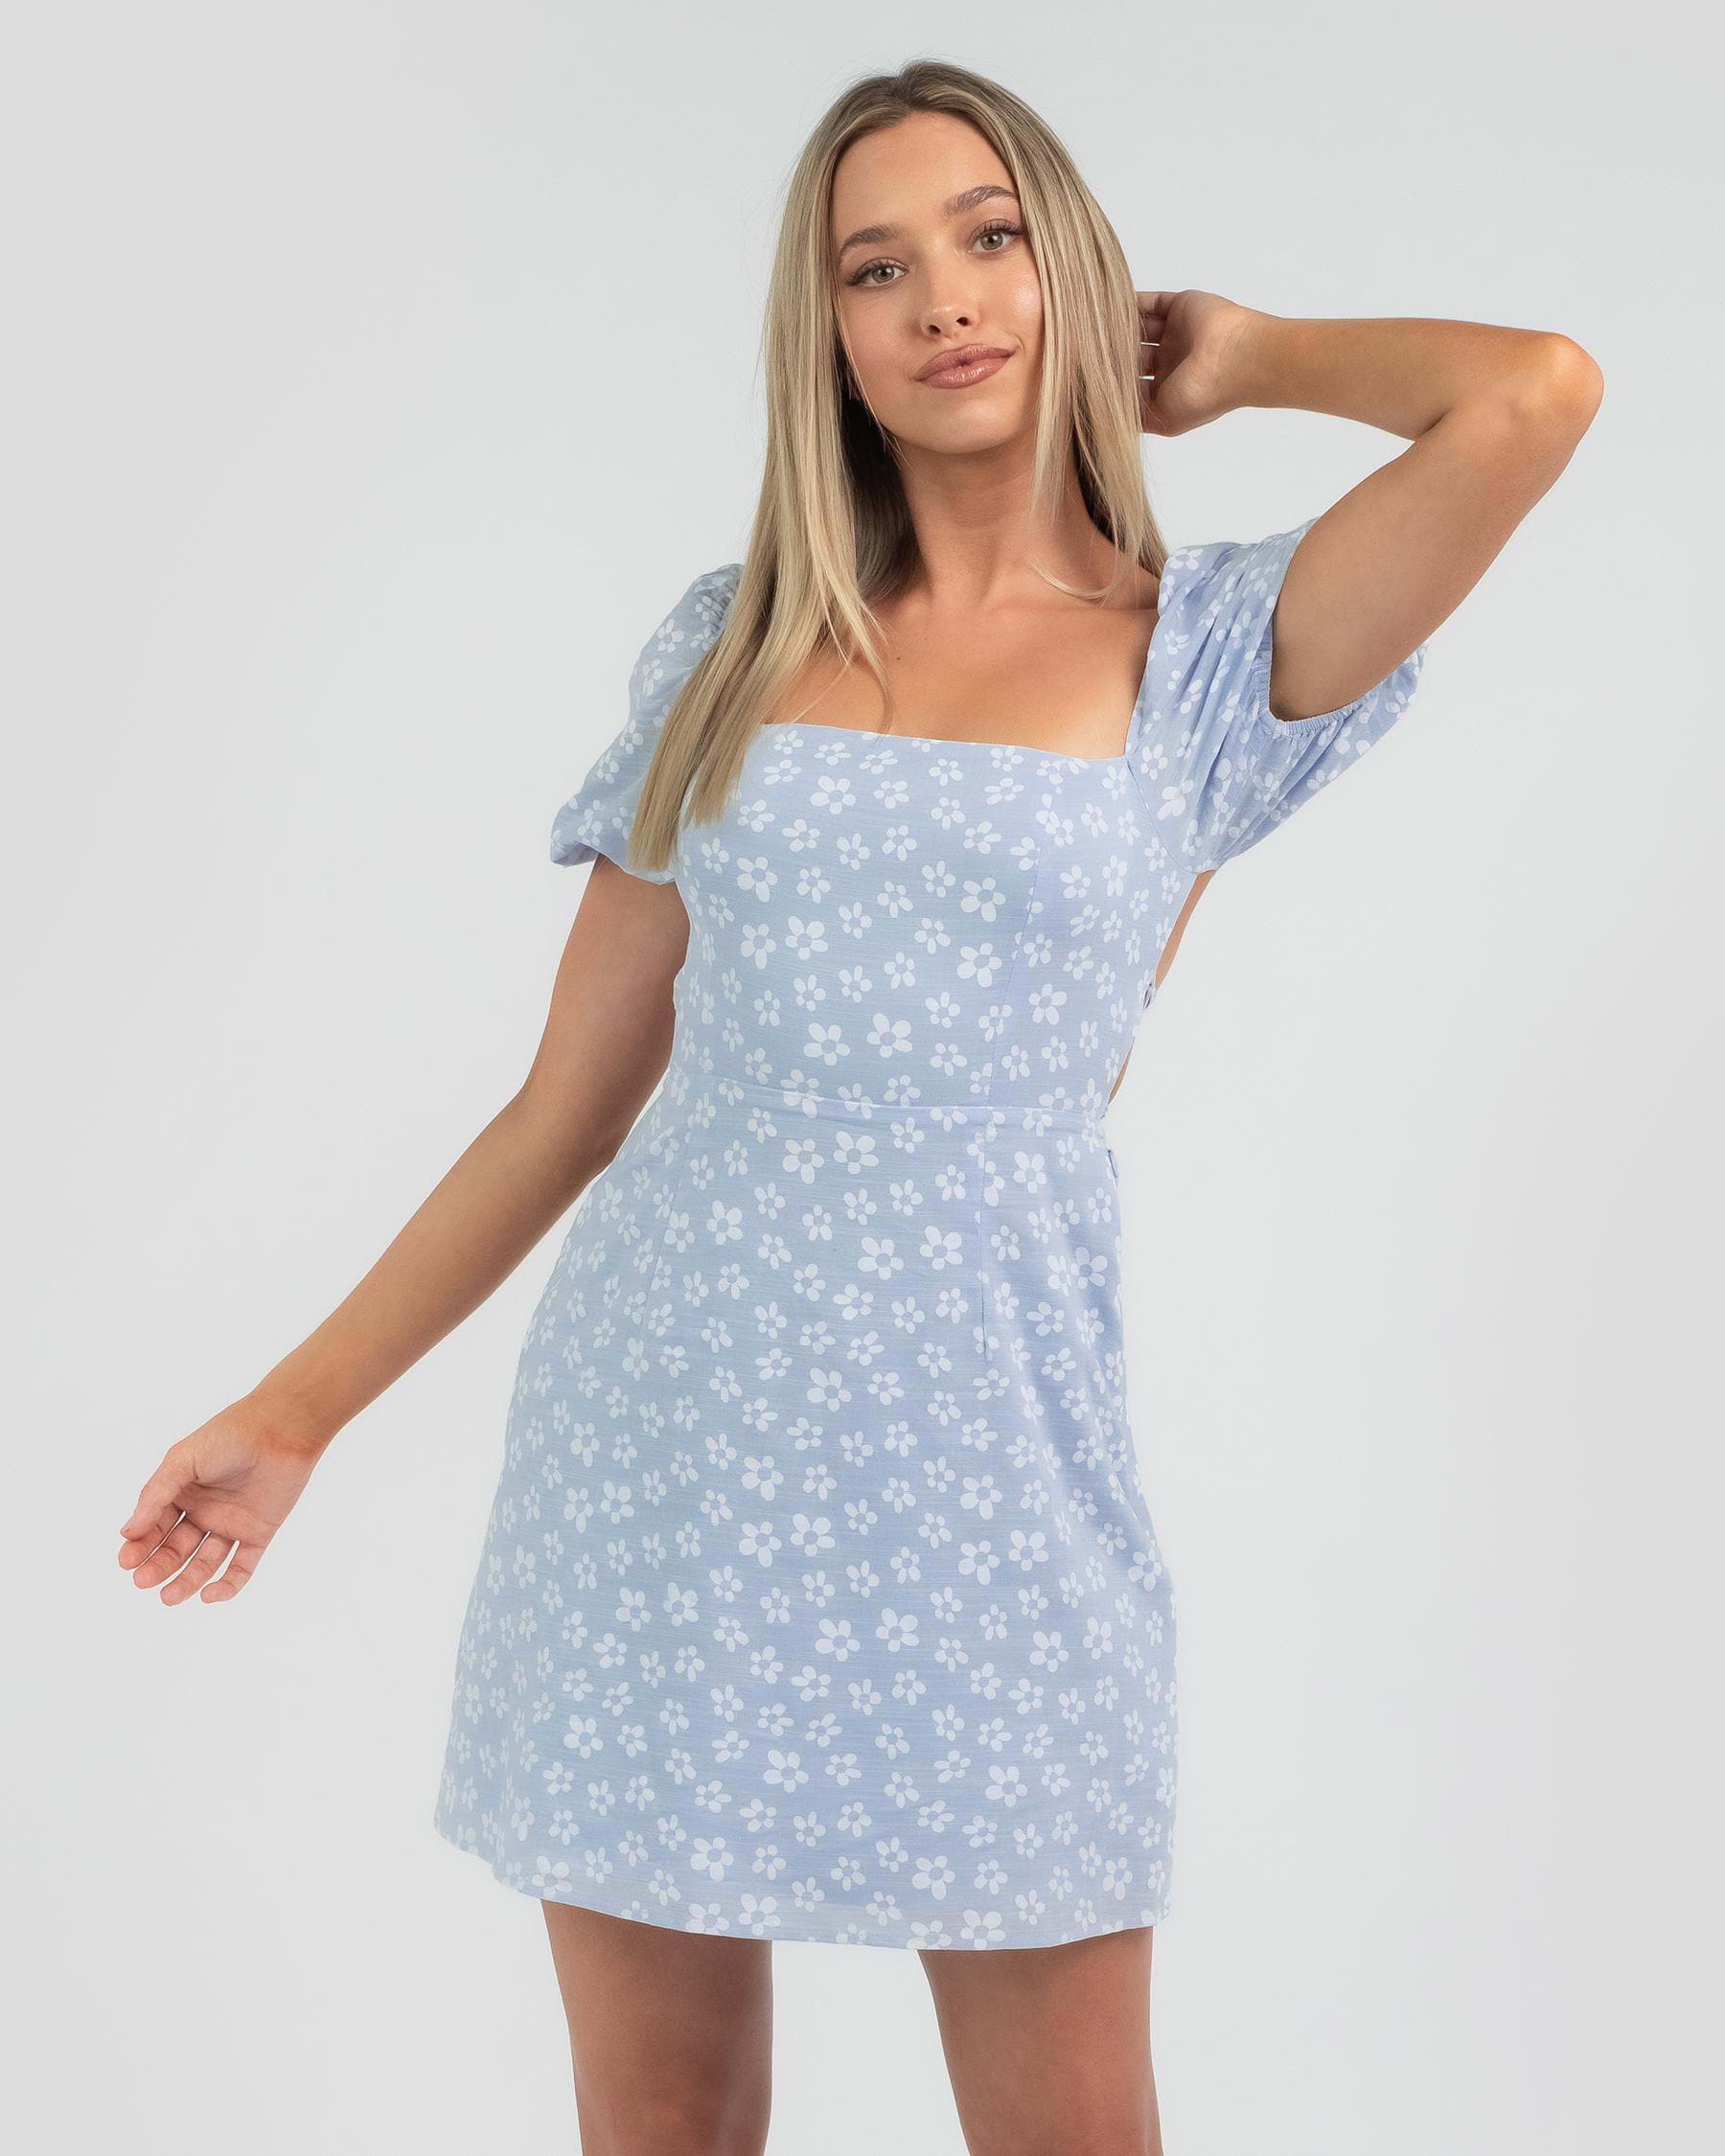 Ava And Ever Eloise Dress In Blue/white - Fast Shipping & Easy Returns ...